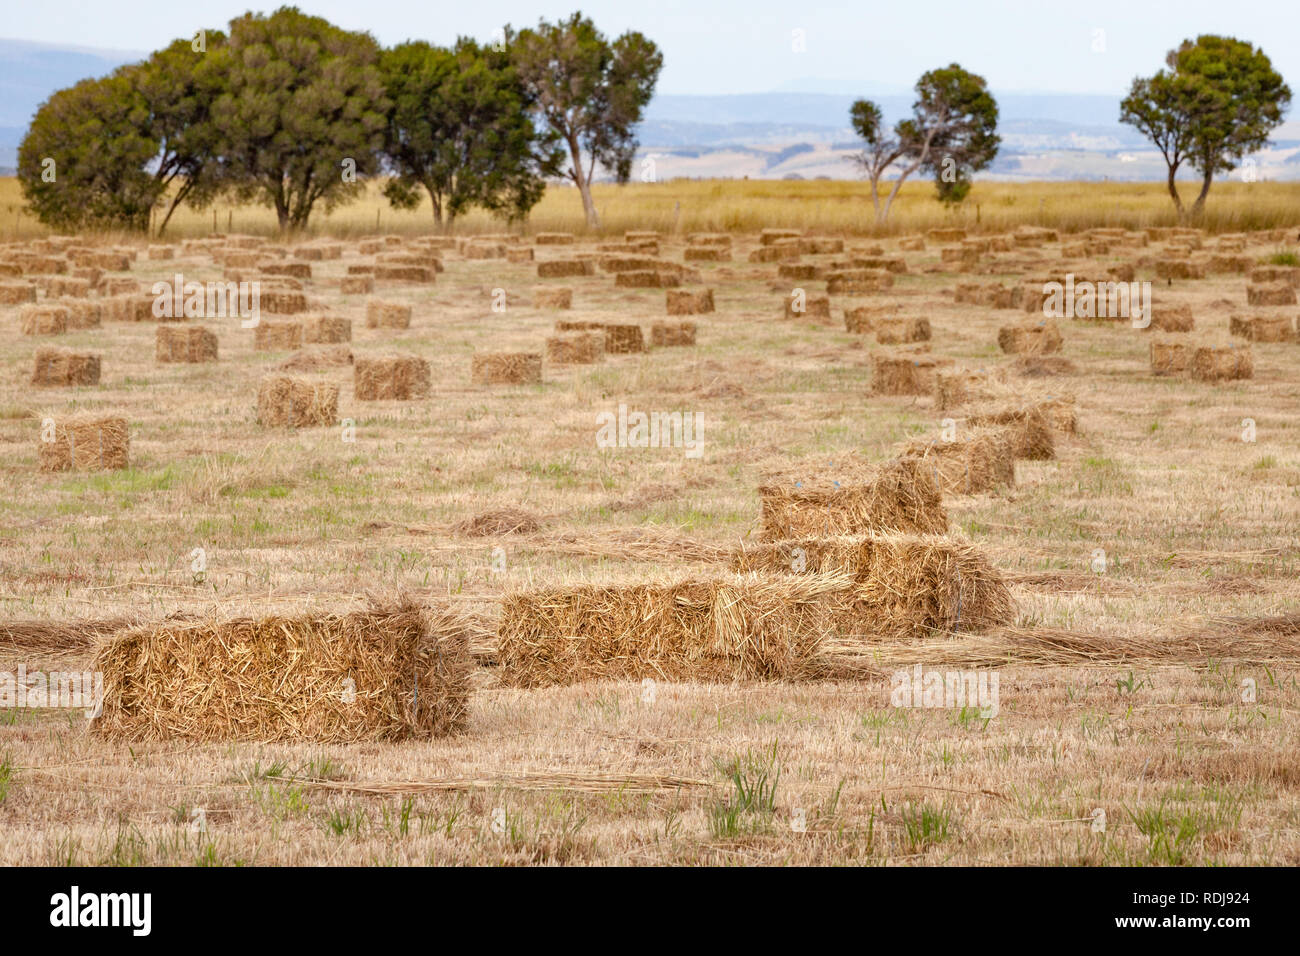 Bales of hay look golden in the harsh summer sun as they lay in the field waiting to be collected and stored for animal feed for next winter. Stock Photo